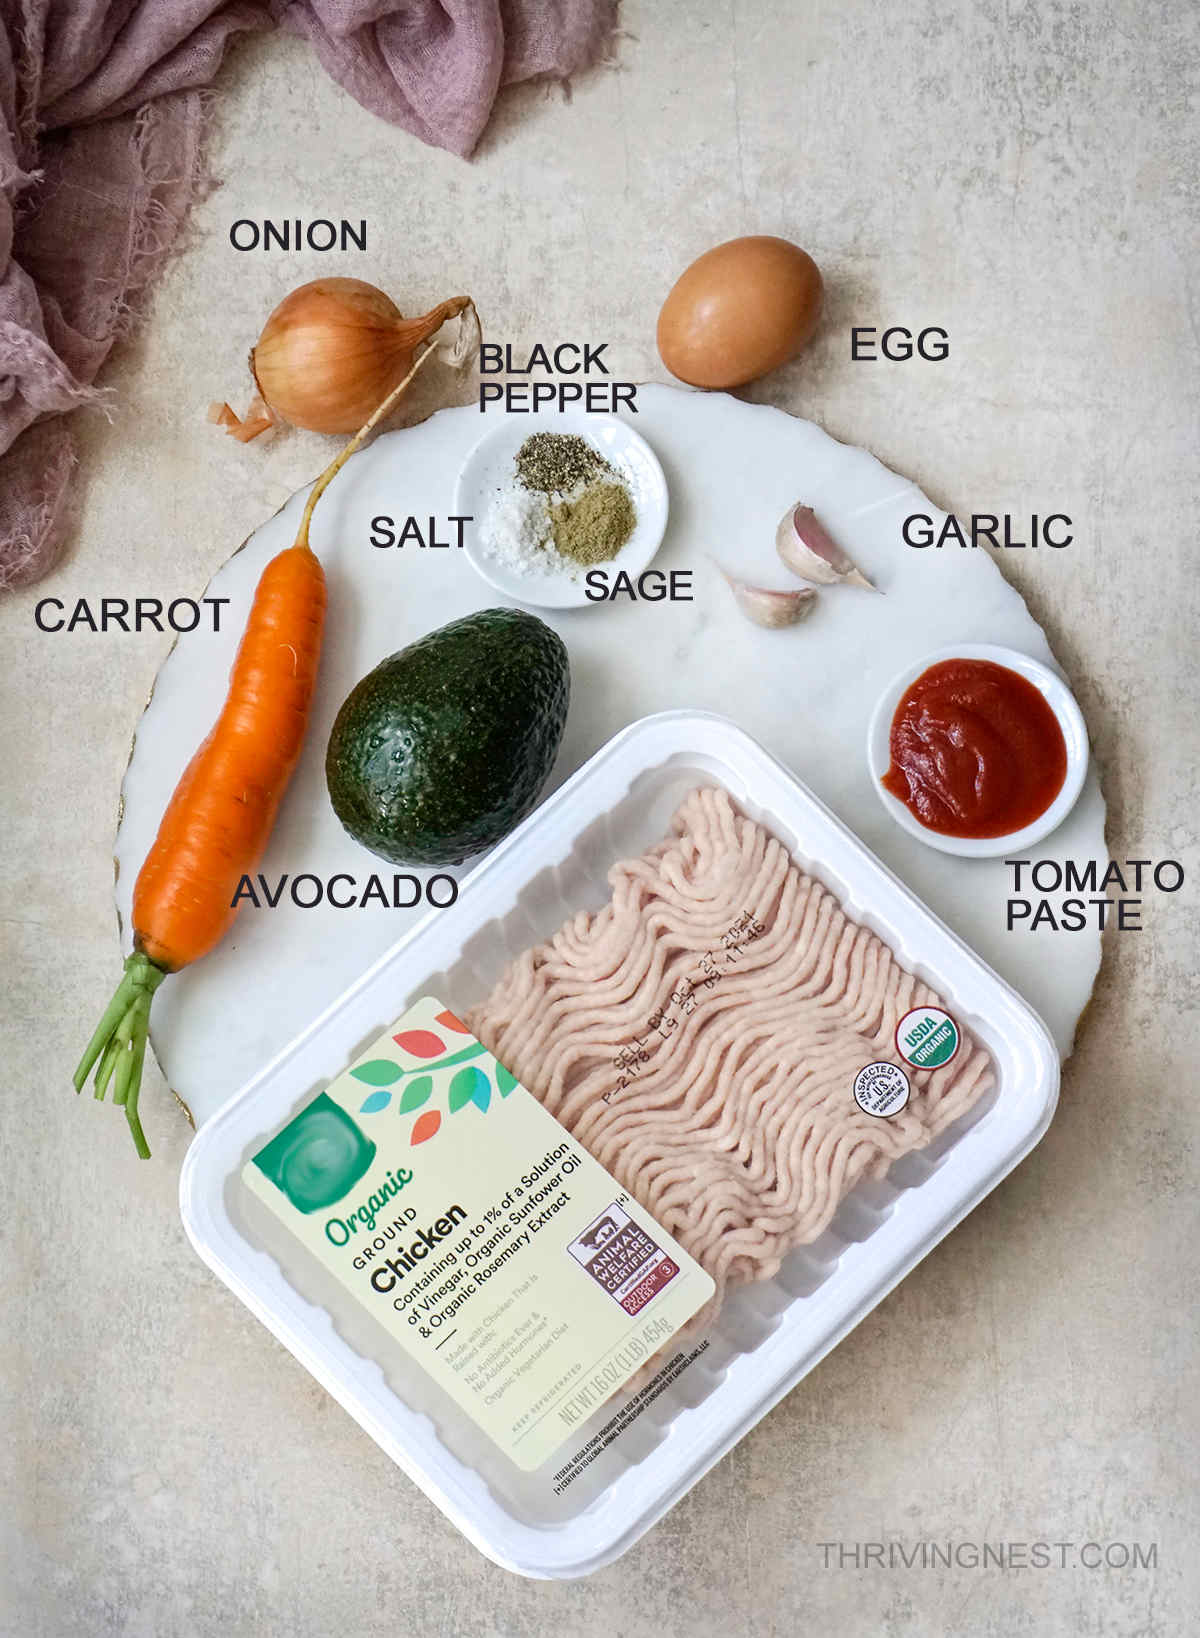 Ingredients for soft chicken meatballs for baby and toddlers.